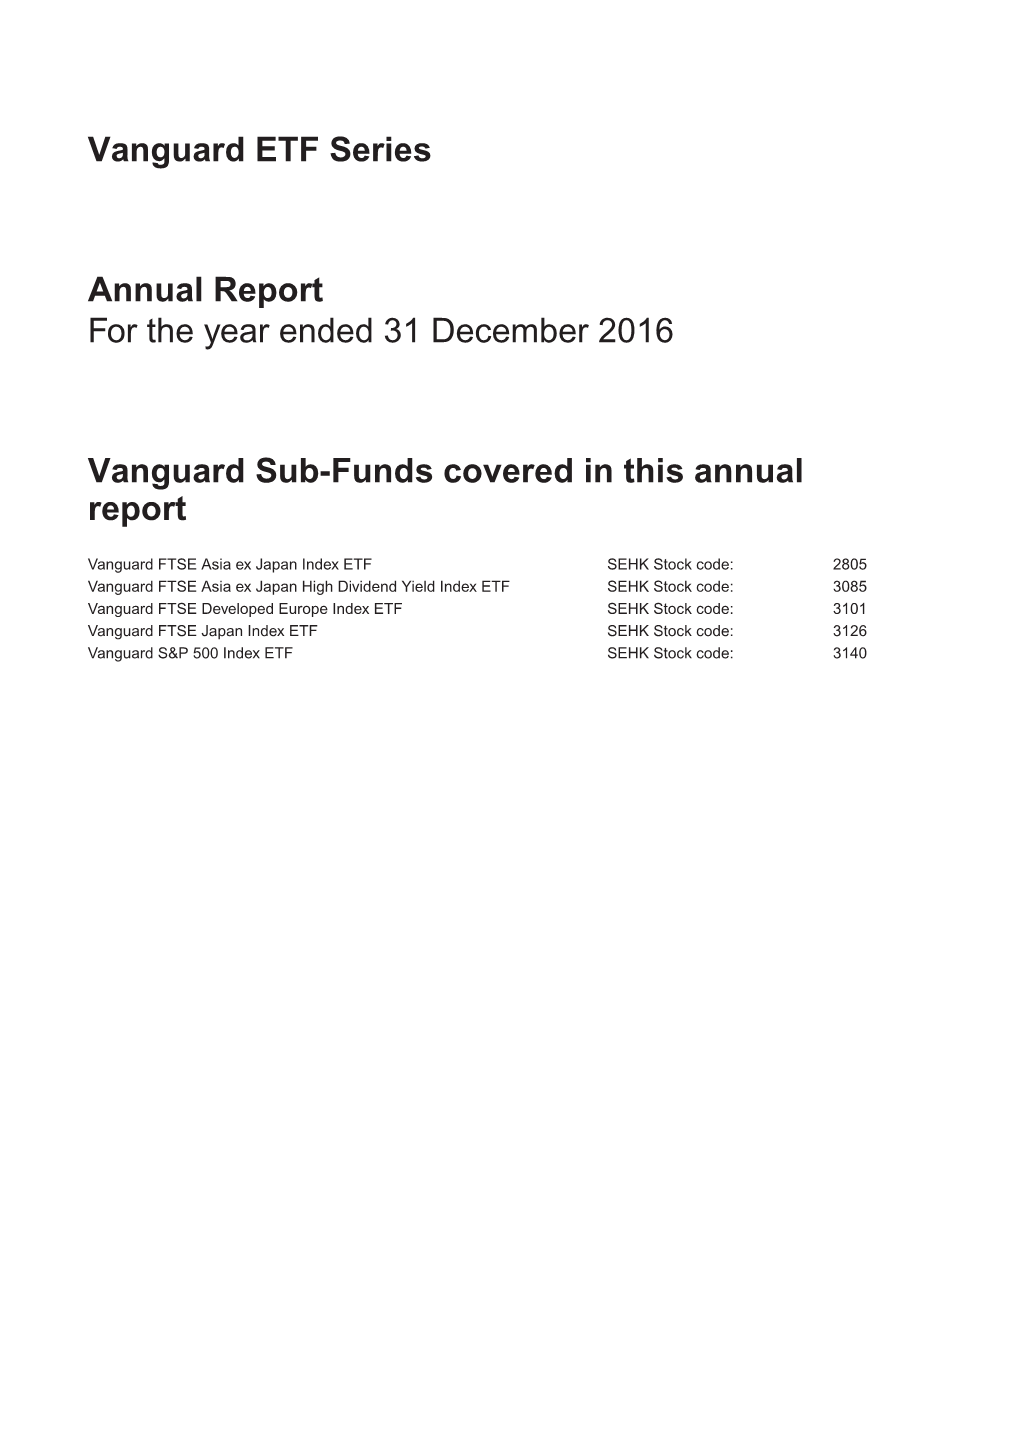 Vanguard ETF Series Annual Report for the Year Ended 31 December